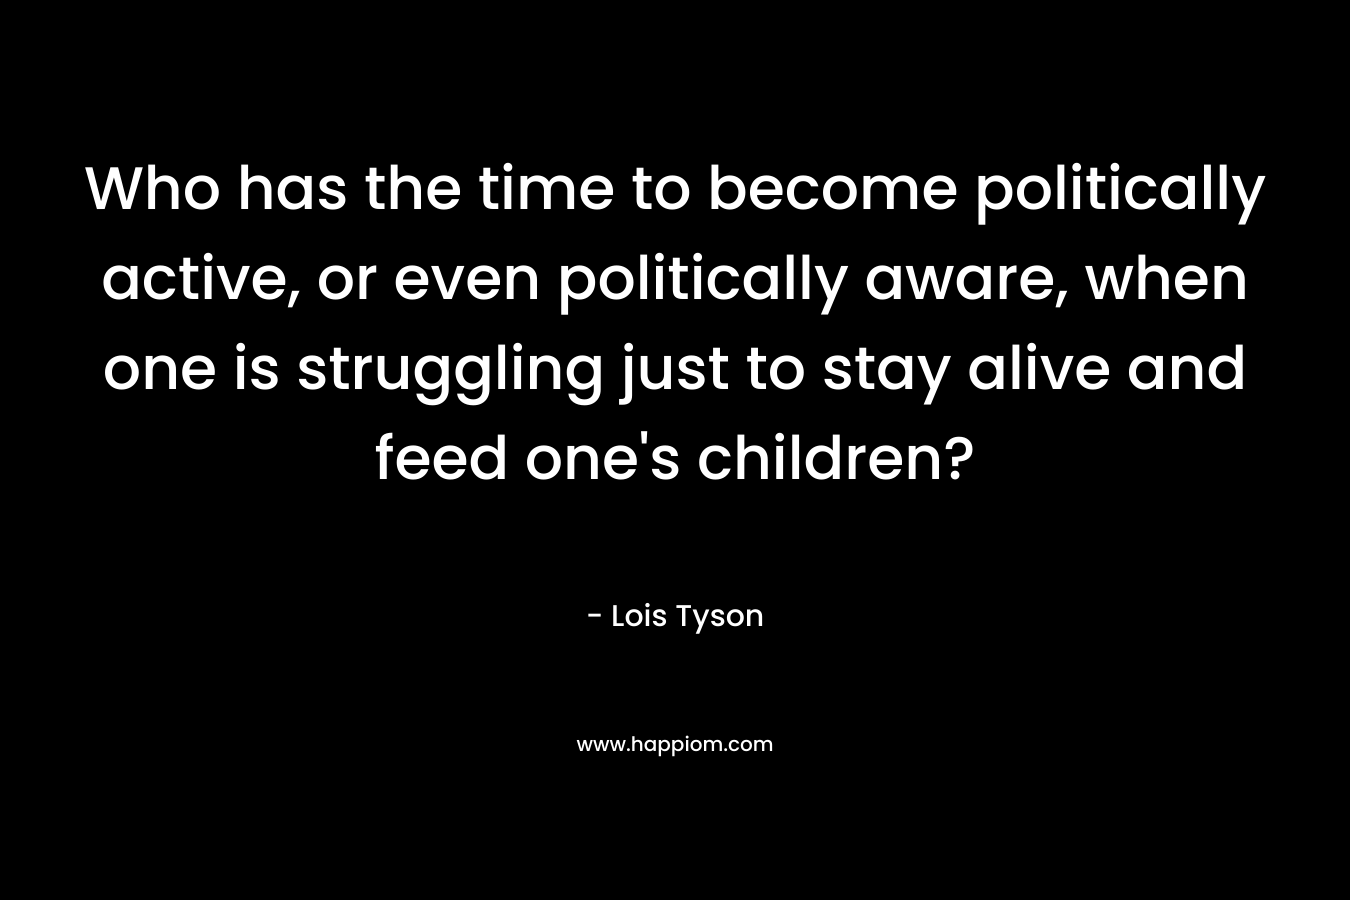 Who has the time to become politically active, or even politically aware, when one is struggling just to stay alive and feed one’s children? – Lois Tyson